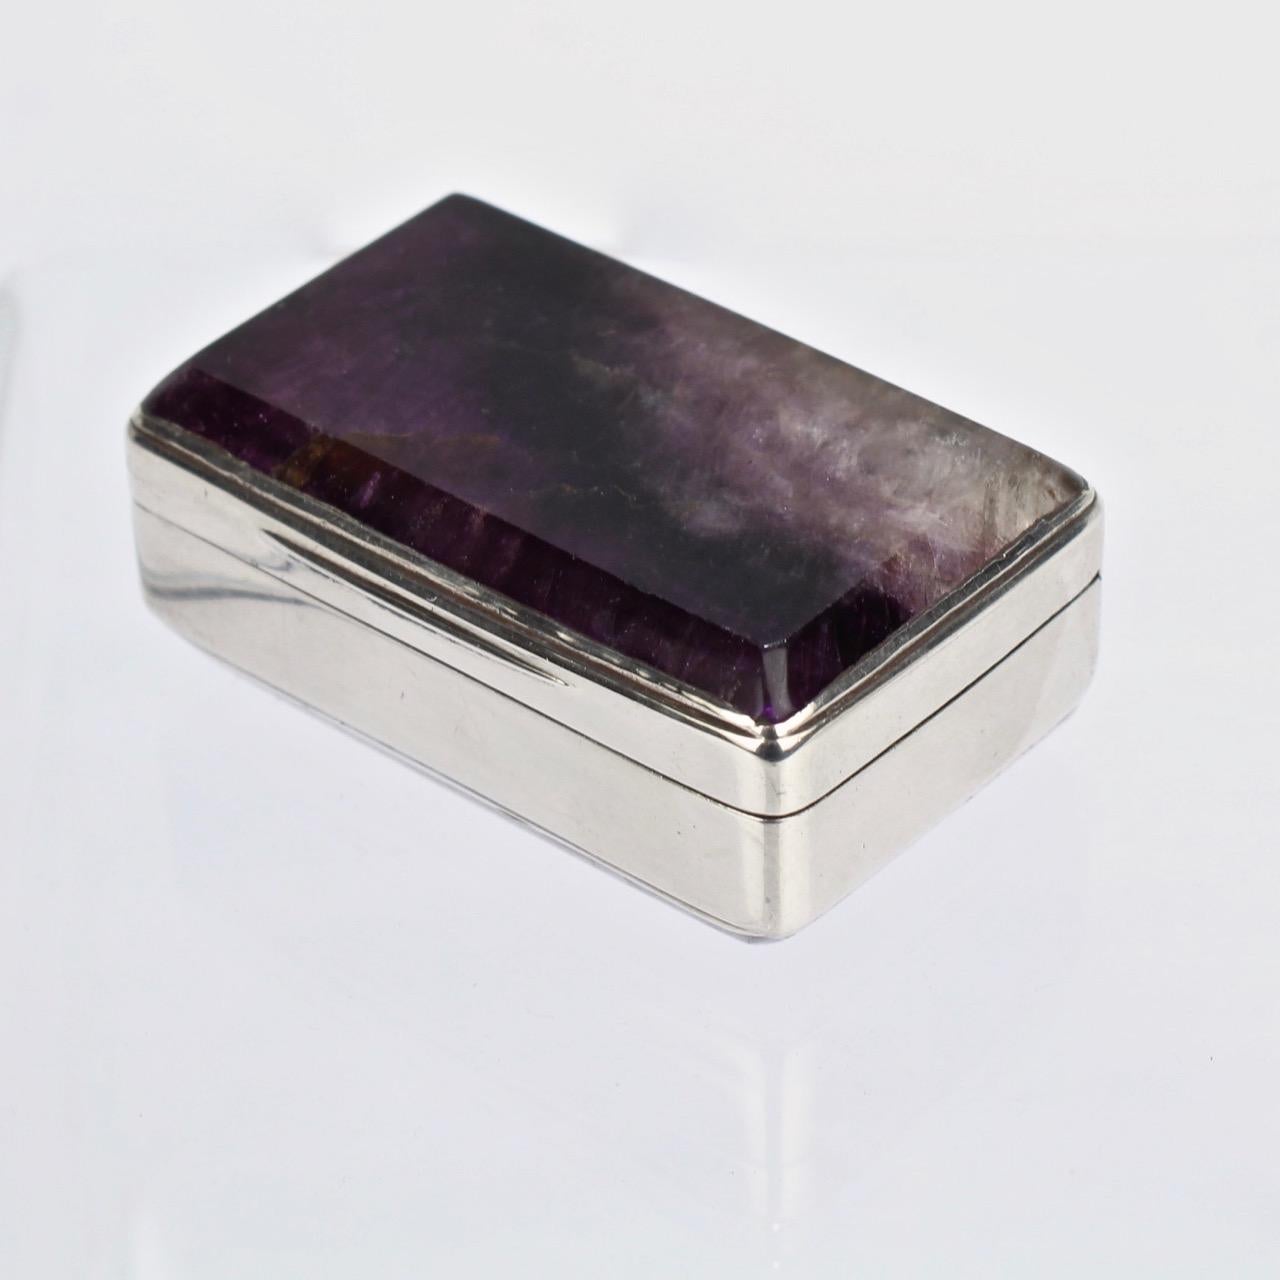 A very rare Victorian sterling silver snuff box inset with bluejohn (or Derbyshire spar) panels to the base and lid.

The interior rim bears hallmarks for Joseph Willmore, Sheffield, sterling and 1840.

Simply a rarity and significant addition to